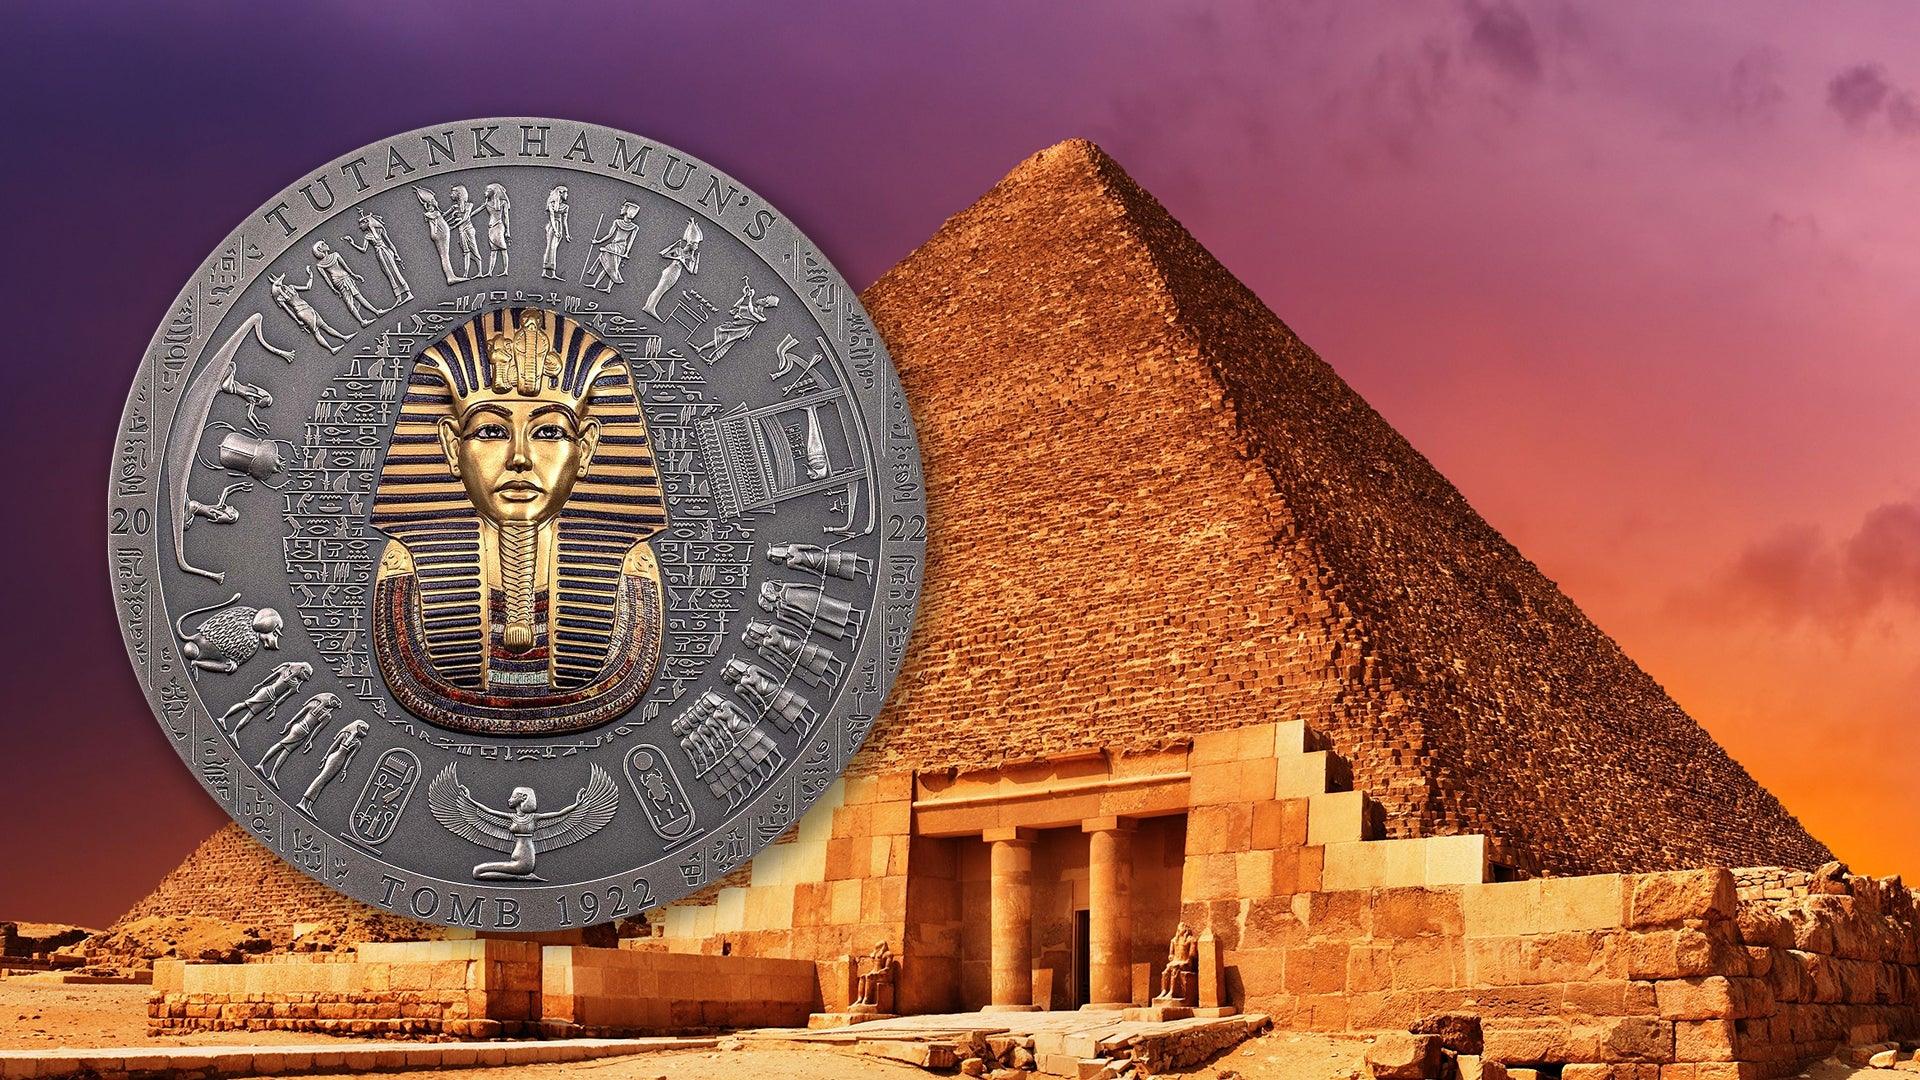 TUTANKHAMUN’S TOMB 1922 Archeology Symbolism Colored 3 Oz Silver Coin 20$ Cook Islands 2022 - PARTHAVA COIN